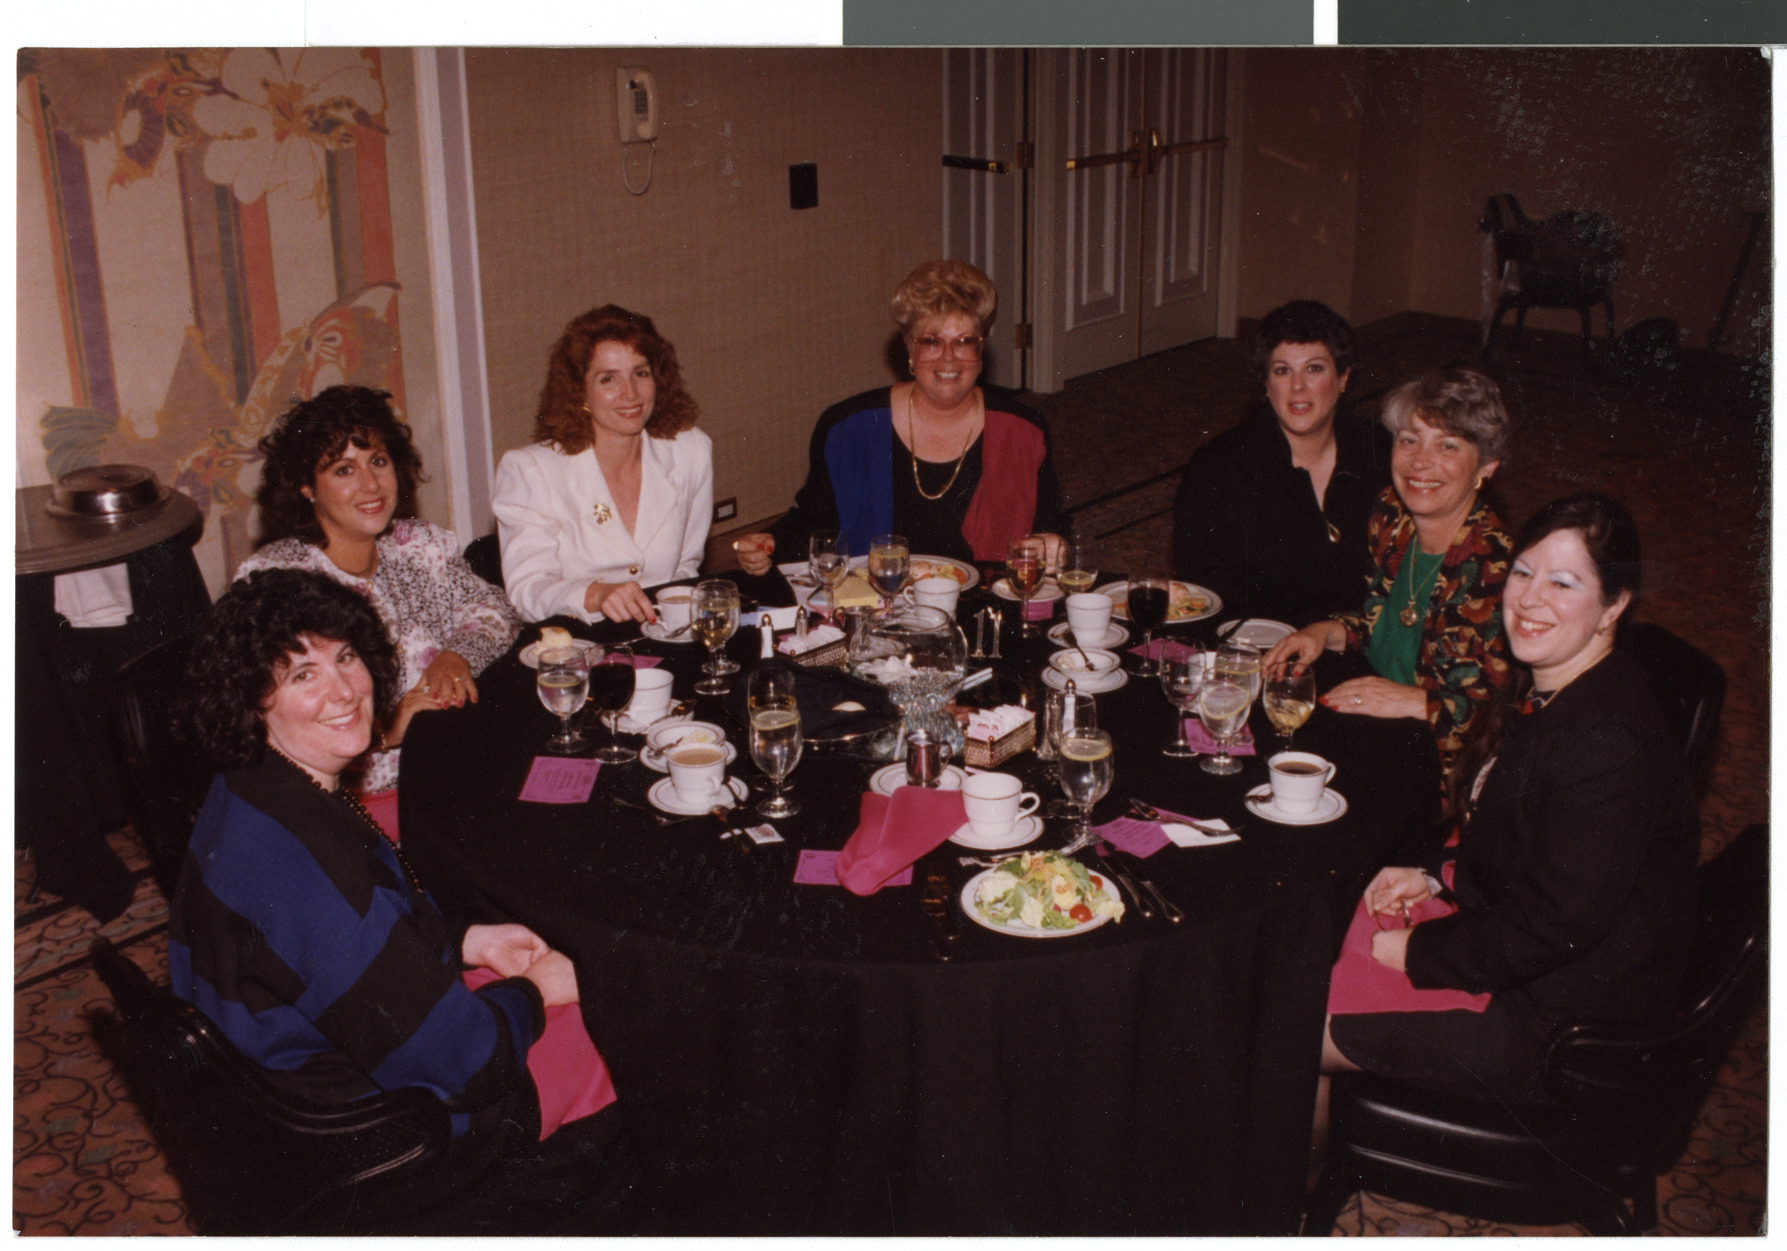 Photographs of Jewish Federation Women's Division Leaders, image 03